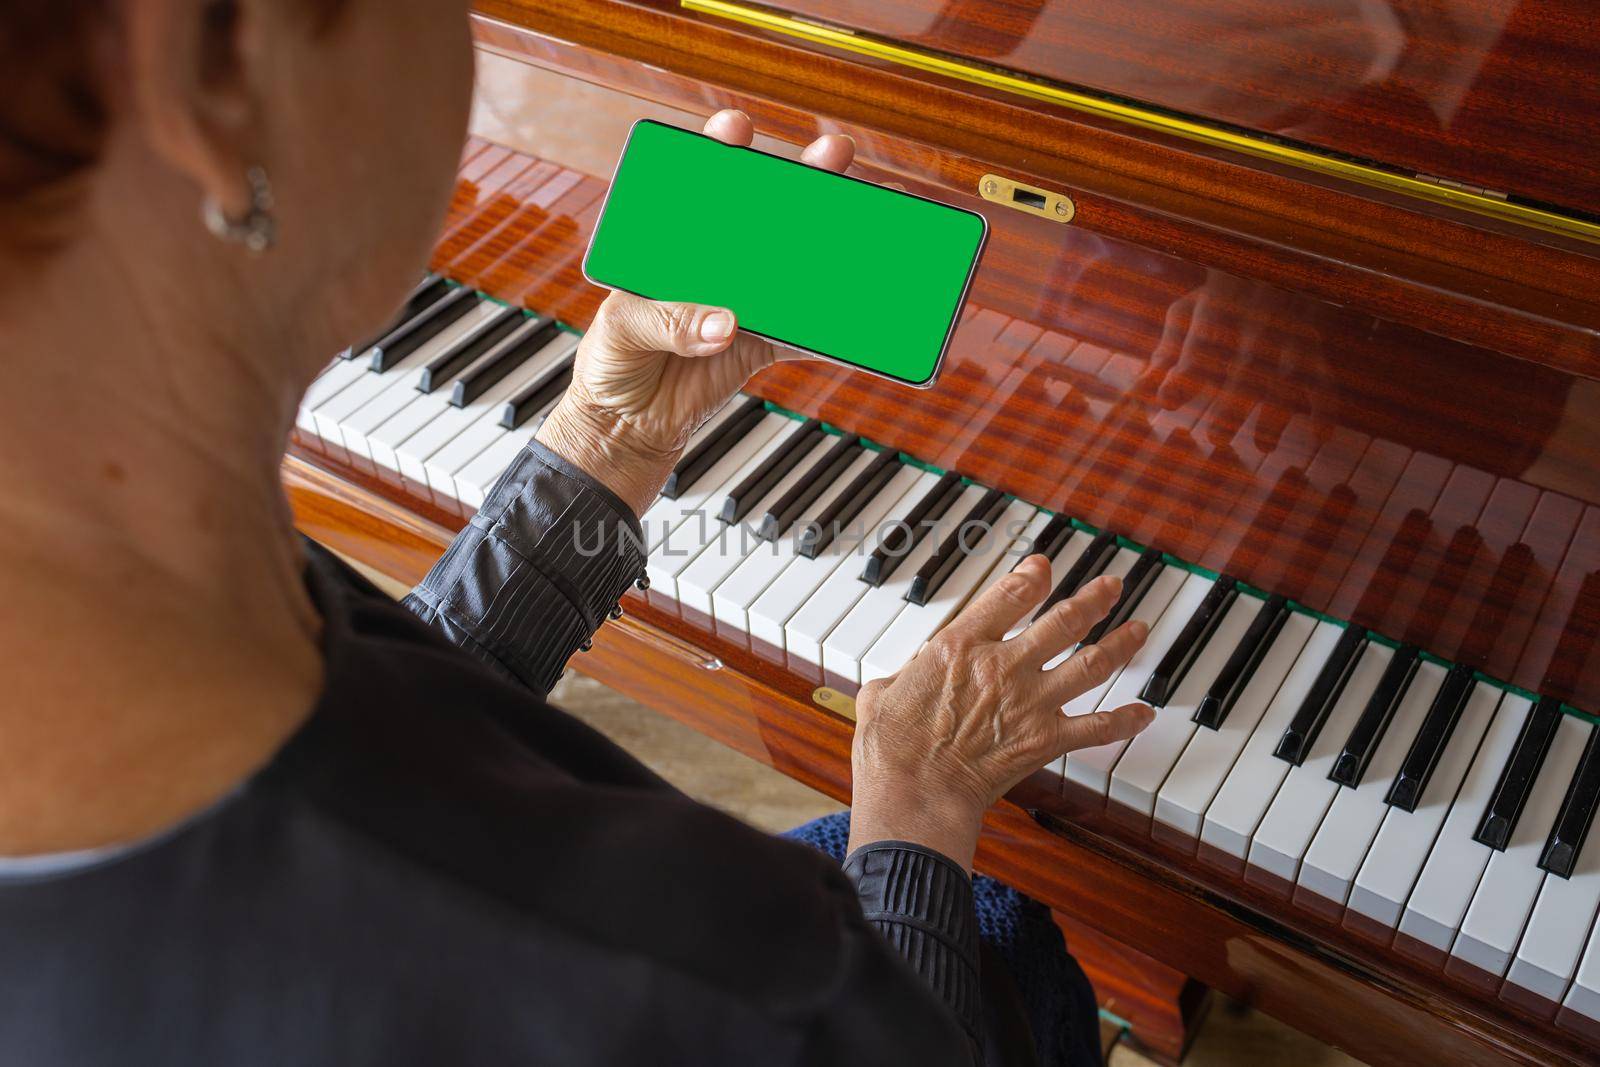 old woman plays the piano, looks into the phone notes. Chroma key on smartphone by Ramanouskaya